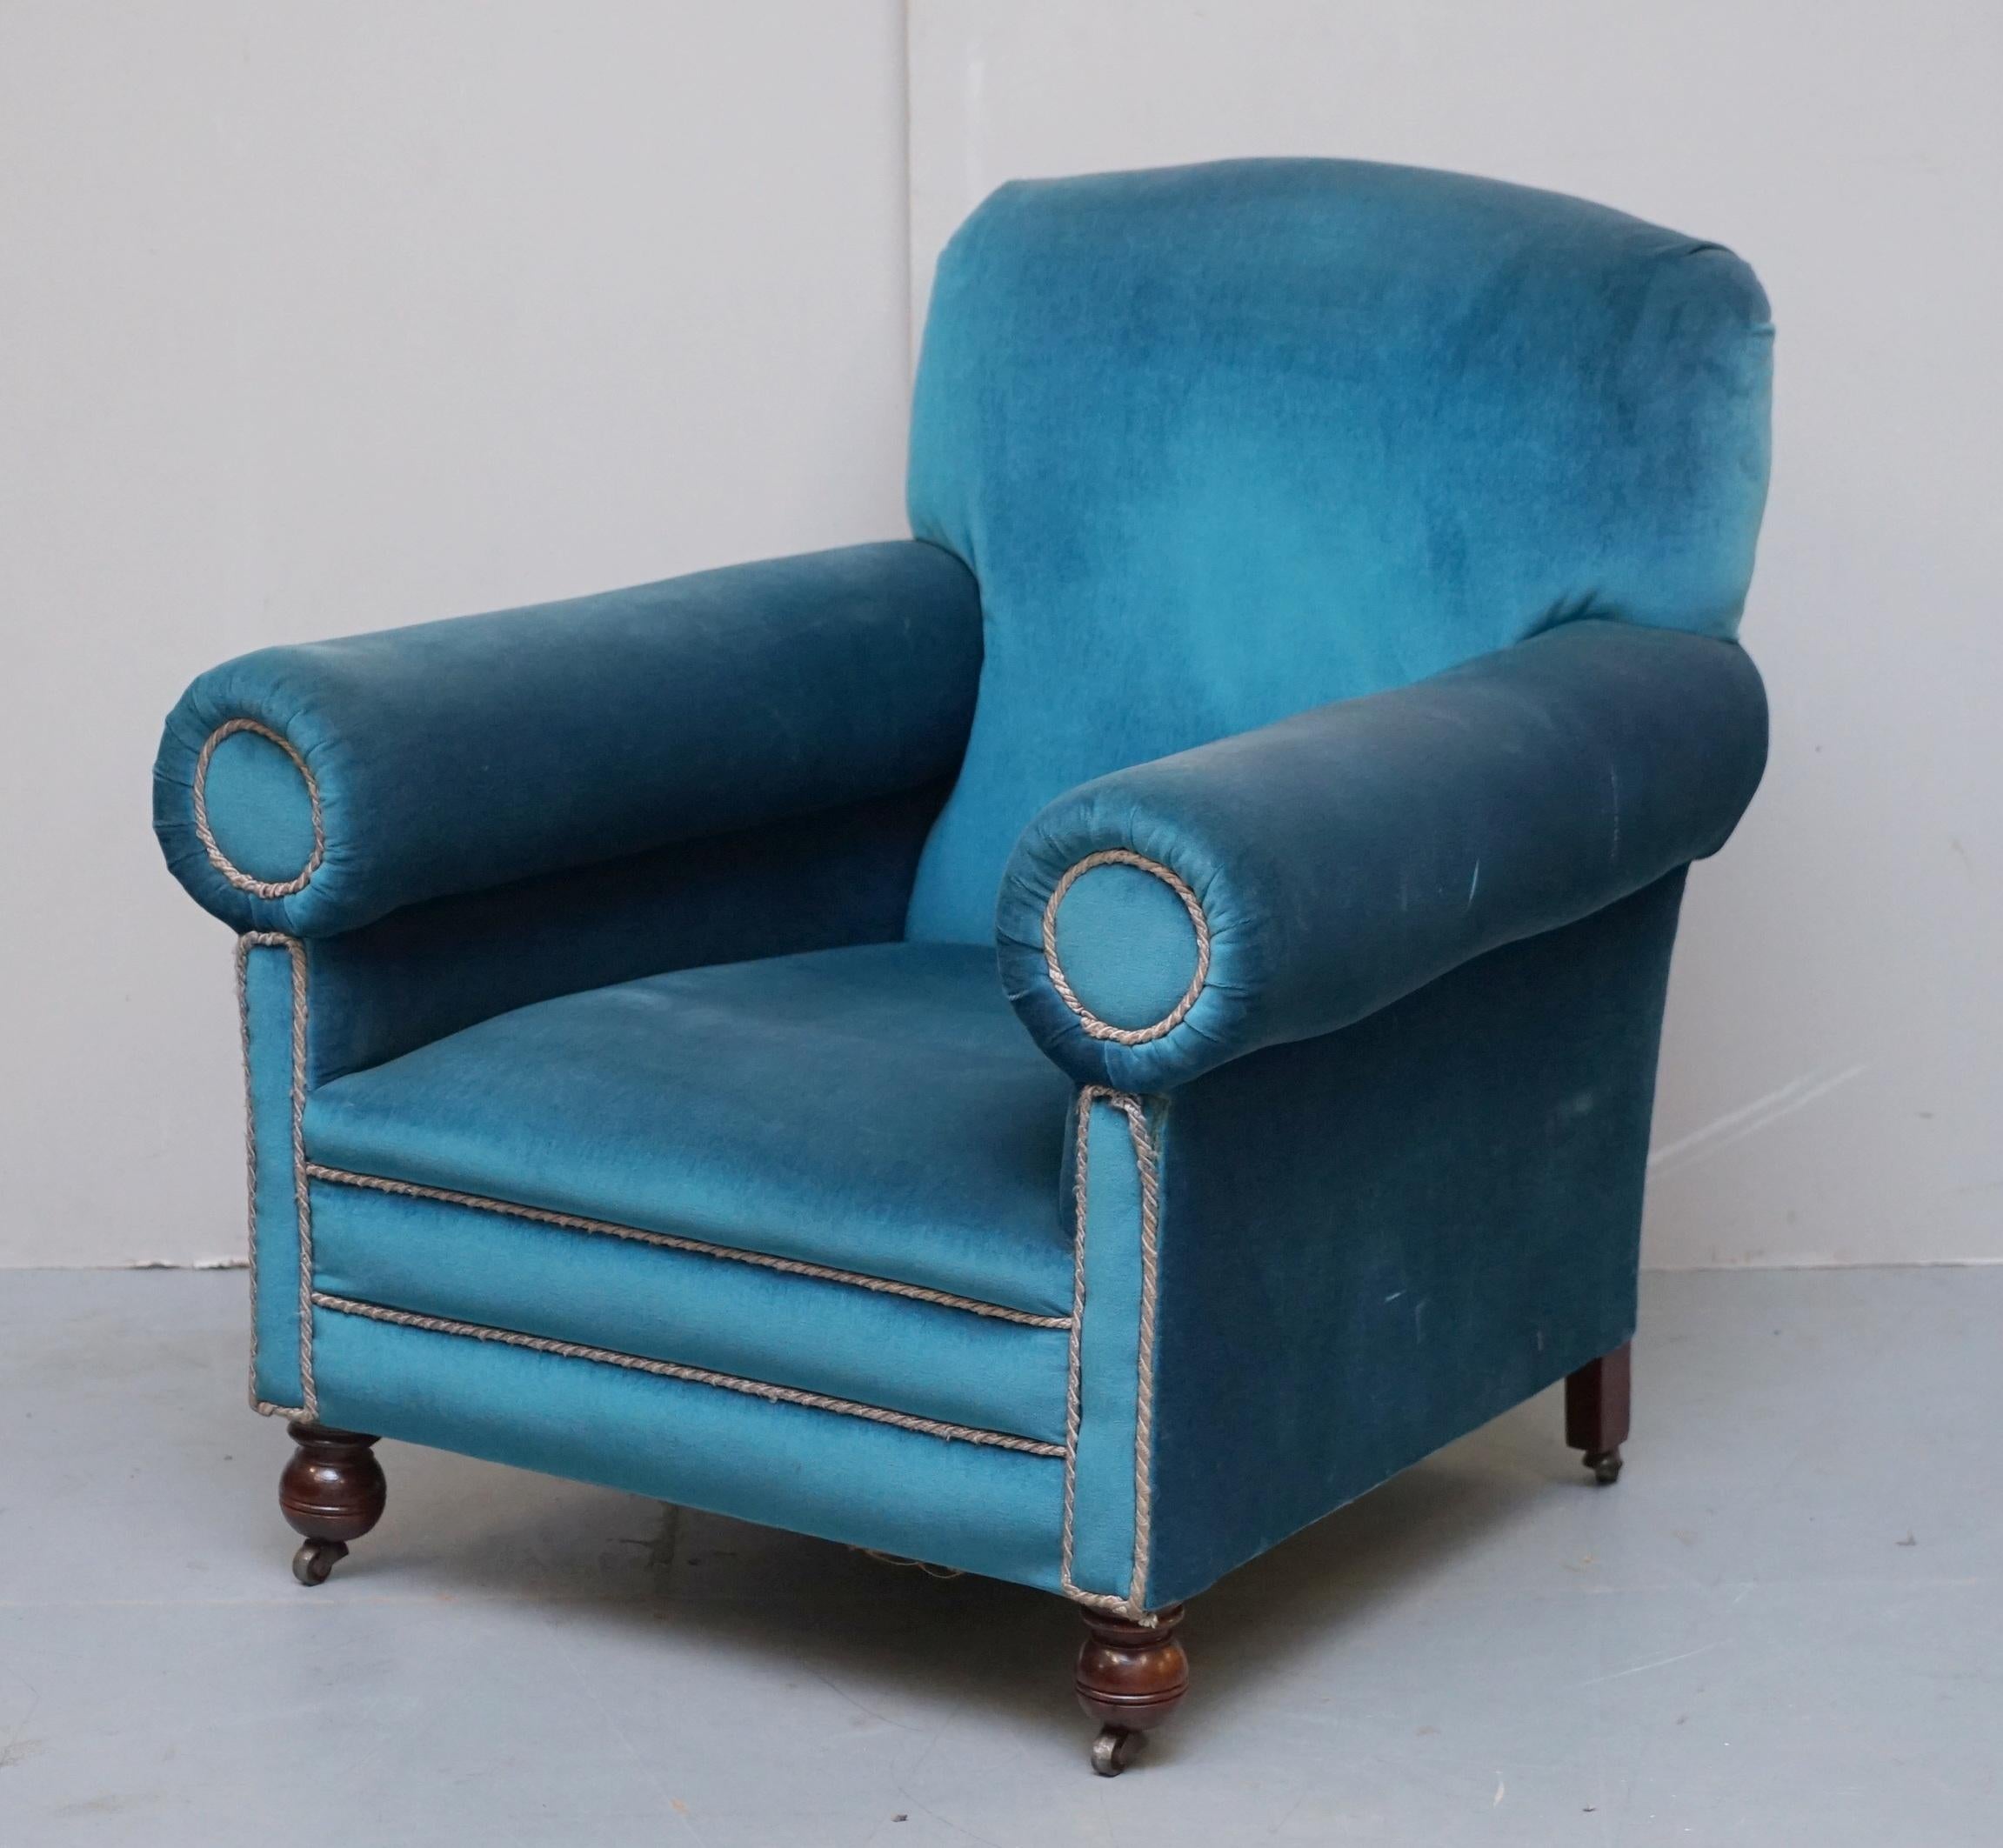 We are delighted to offer this stunning pair of original Victorian circa 1880 club armchairs with bolster arms upholstered in Napoleonic blue velvet made by Maple & Co London

A good looking and well made pair of armchairs with vintage blue velvet